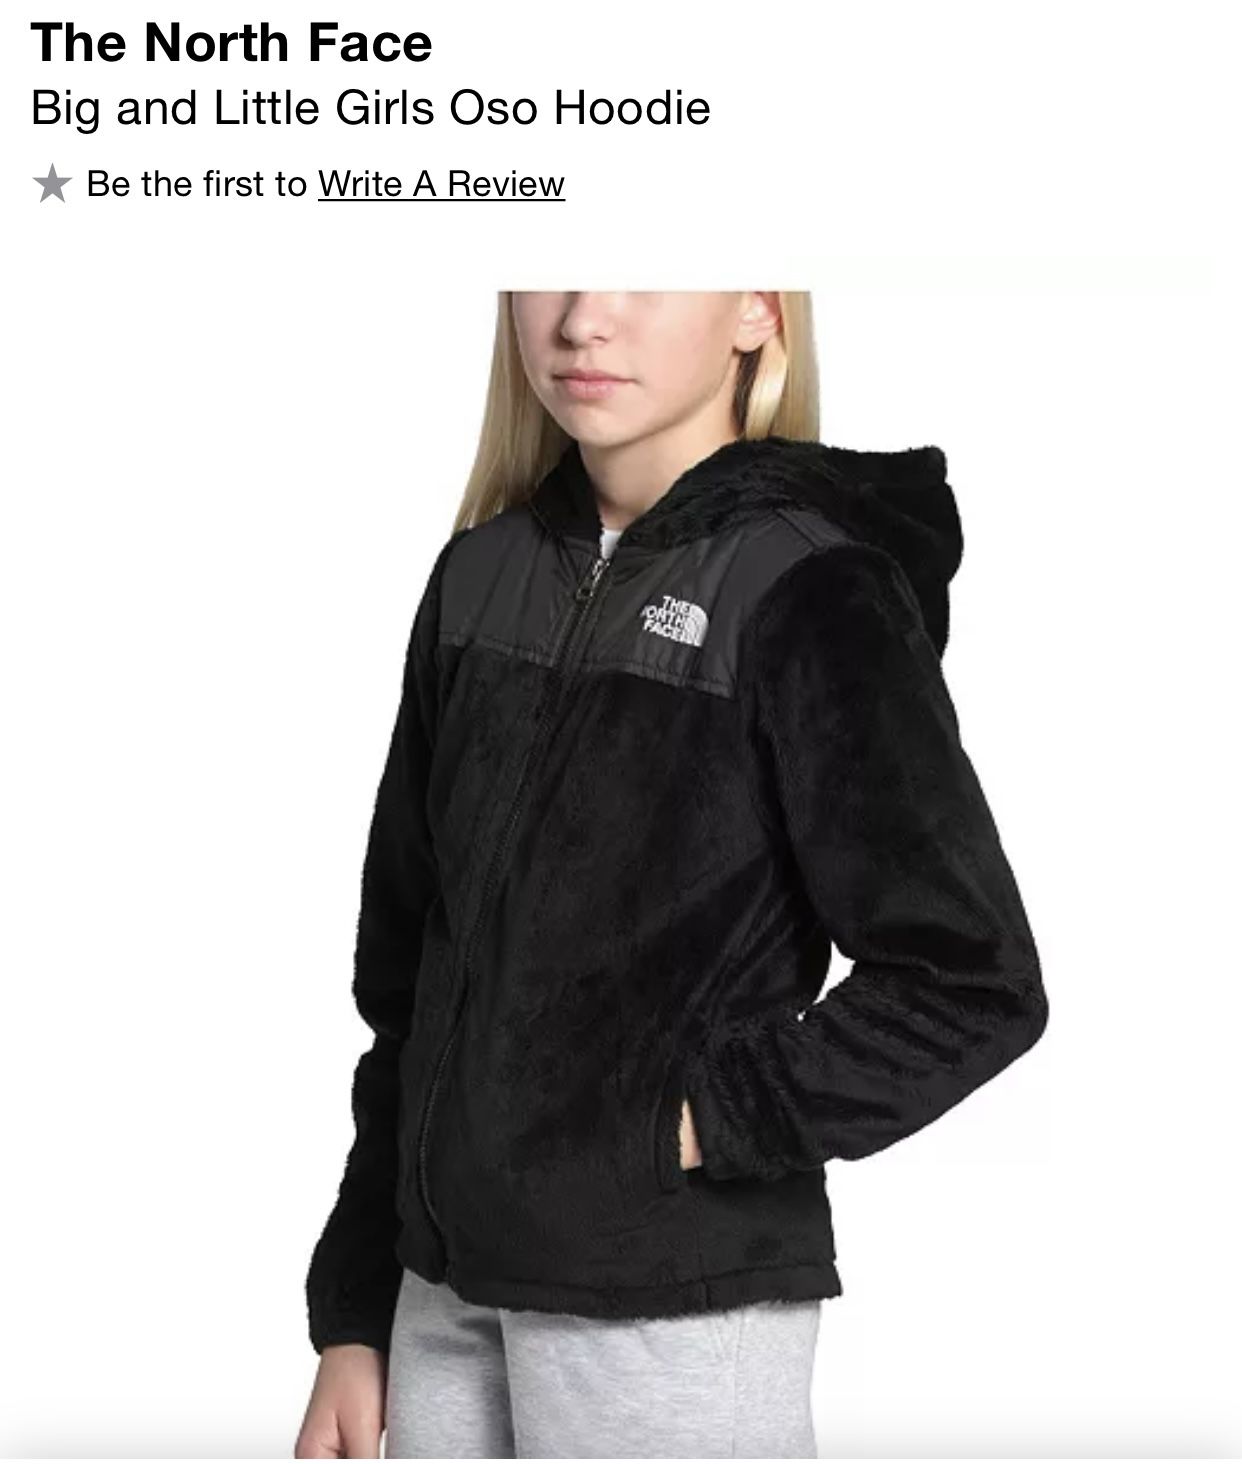 THE NORTH FACE Girls Oso BLACK FULL ZIP HOODED FLEECE JACKET  Reversible Size S / P (7/8). Good Used Condition. Make an offer!